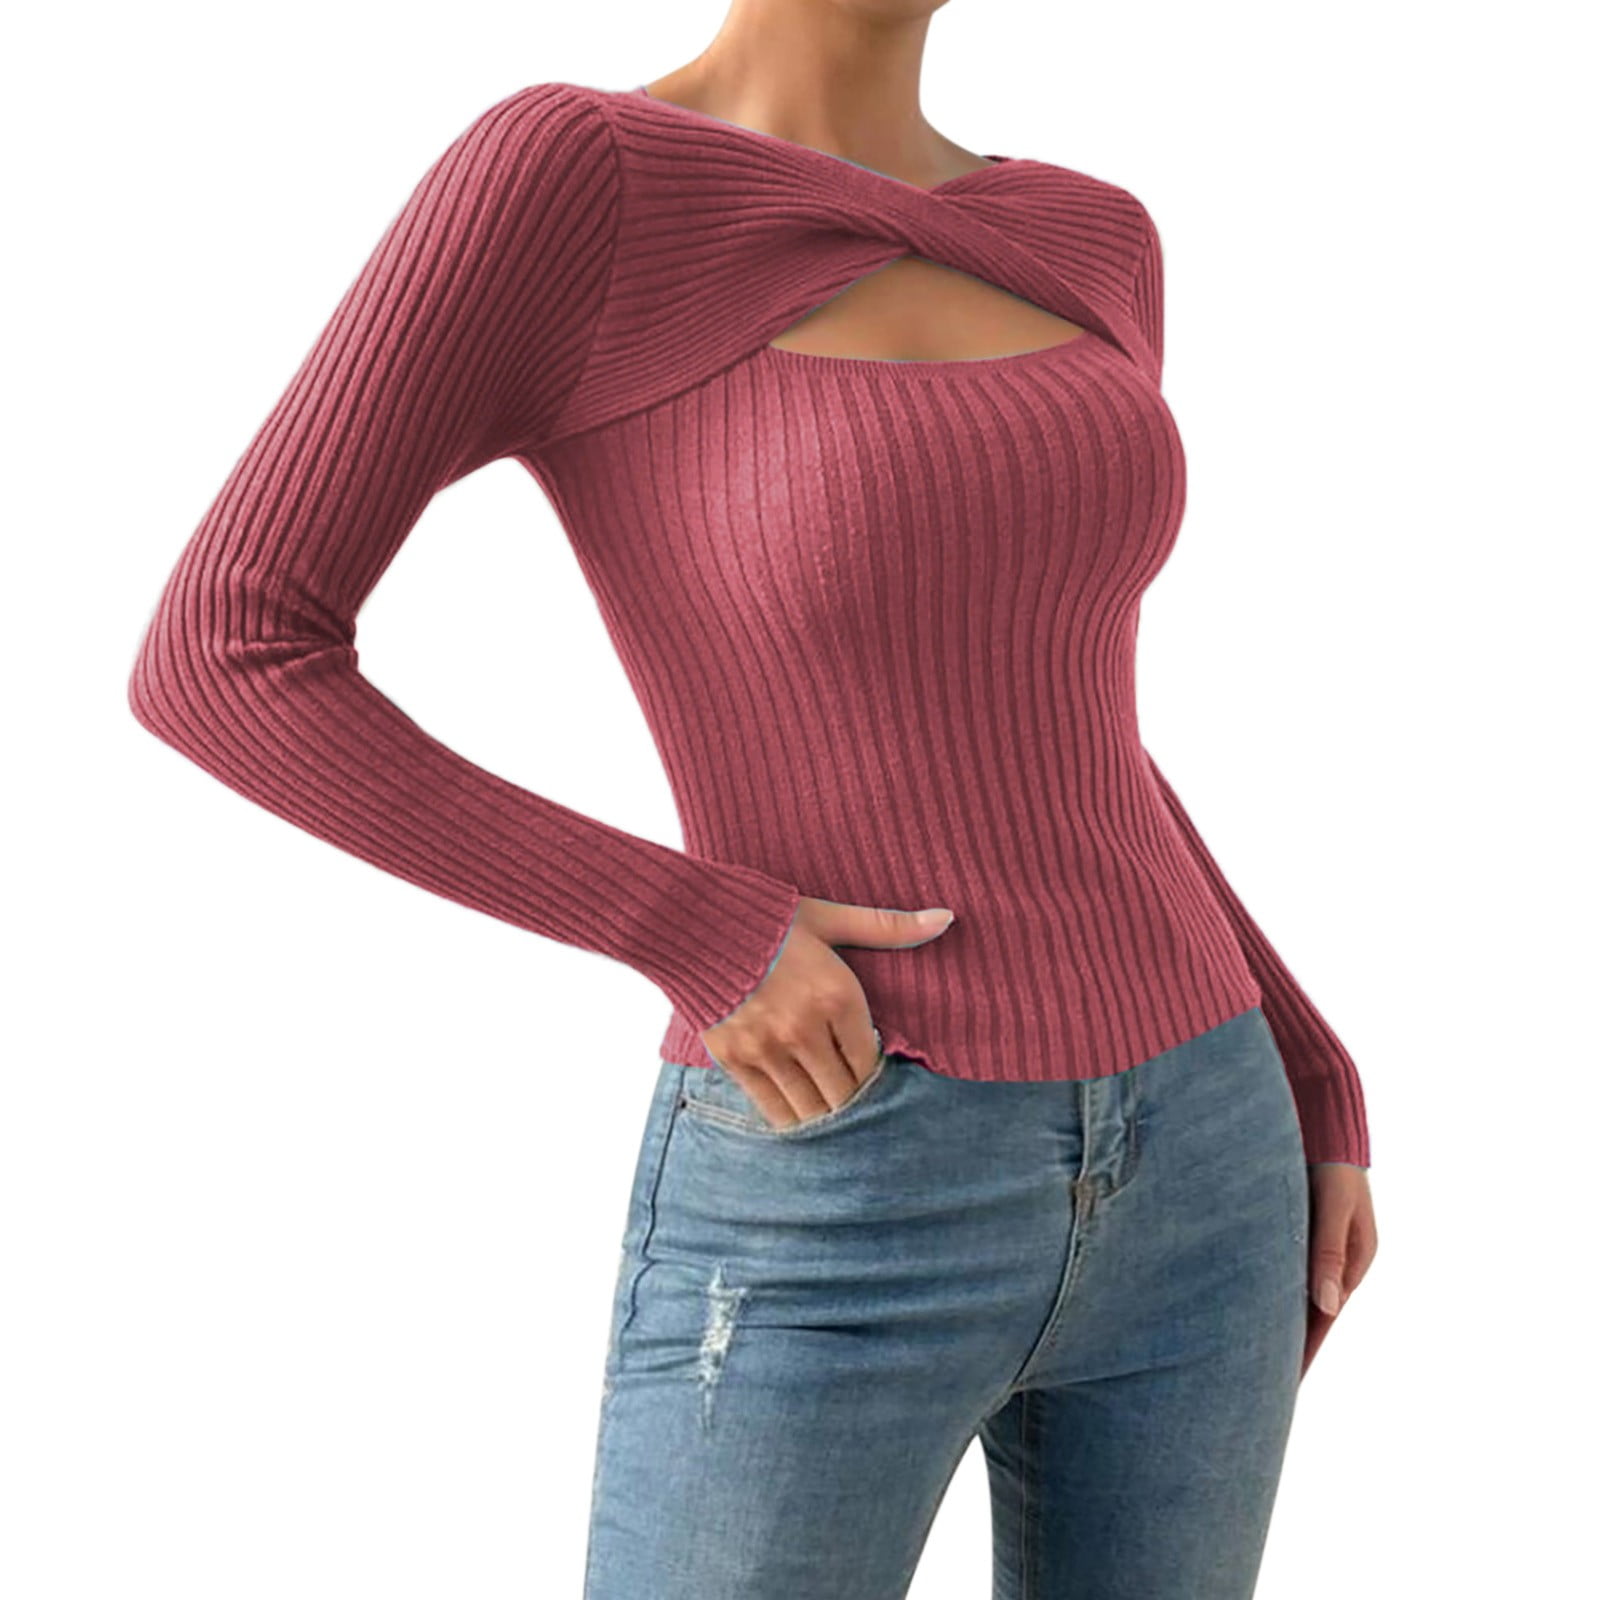 Womens plus Sweaters Women Casual Long Sleeve Hollow Out Irregular ...